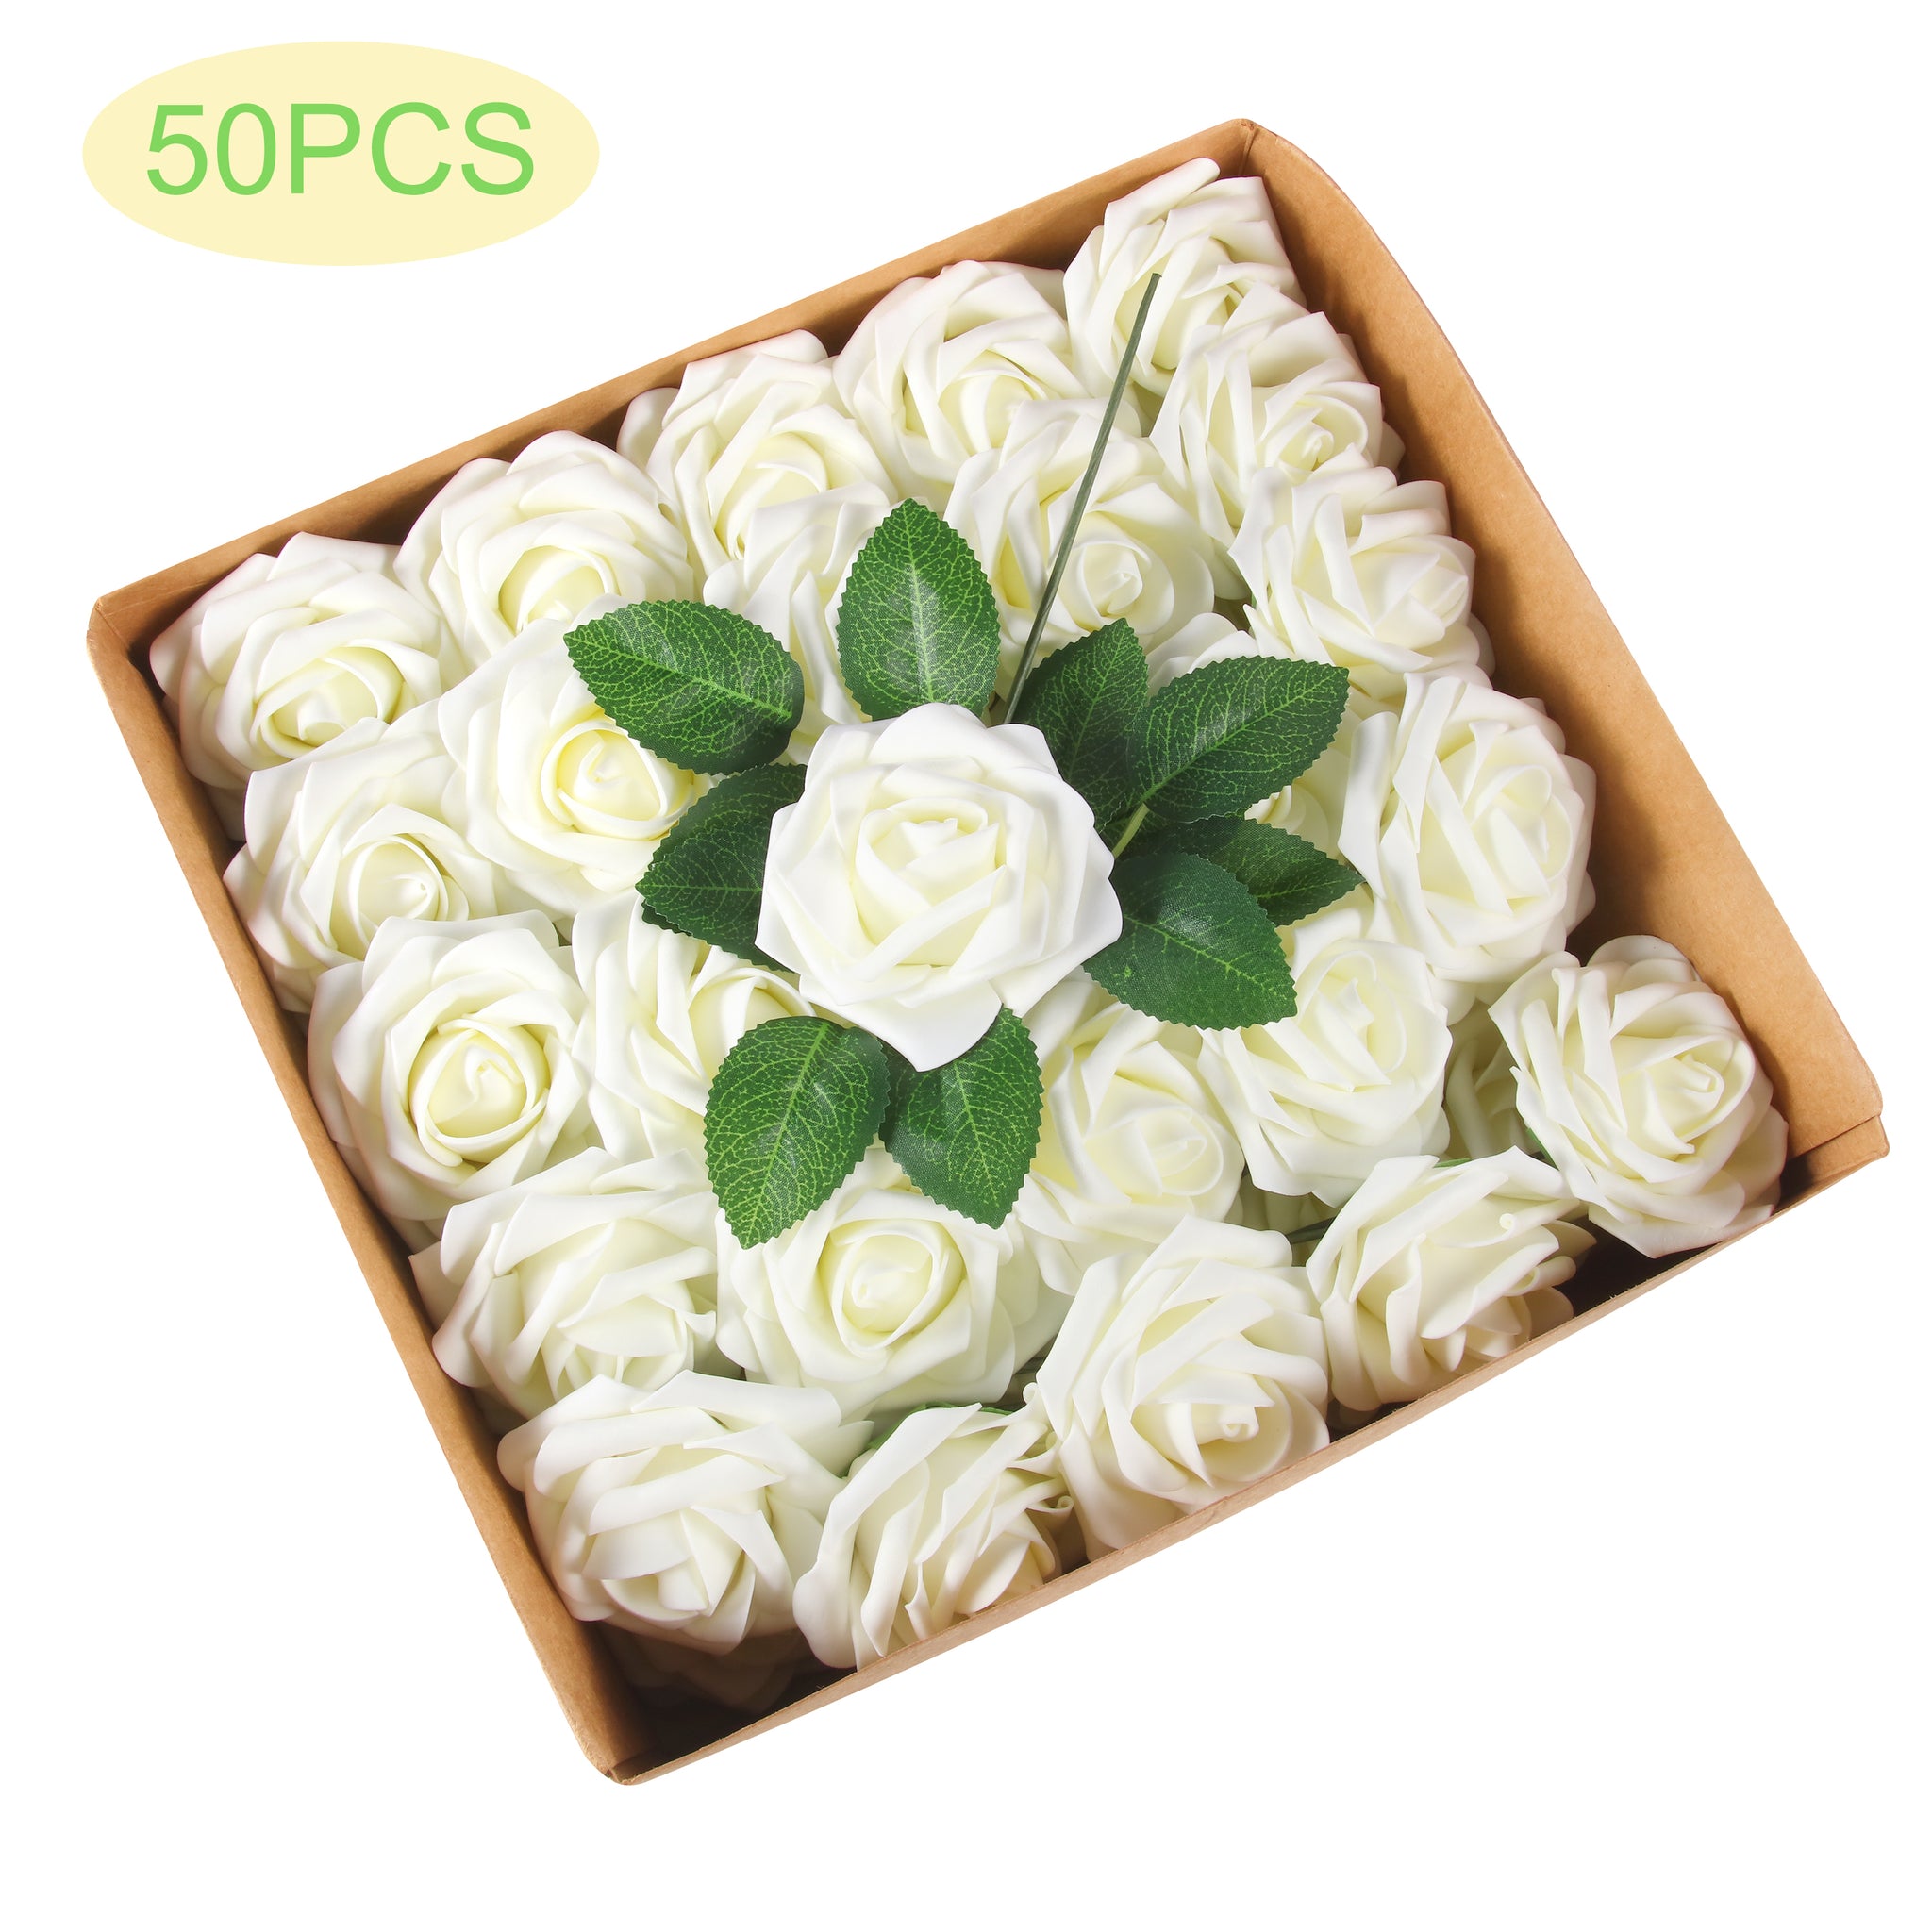 50Pcs 8CM Artificial Rose Fake Flower with Leaves for Home Wedding Party Decoration sapphire ZopiStyle